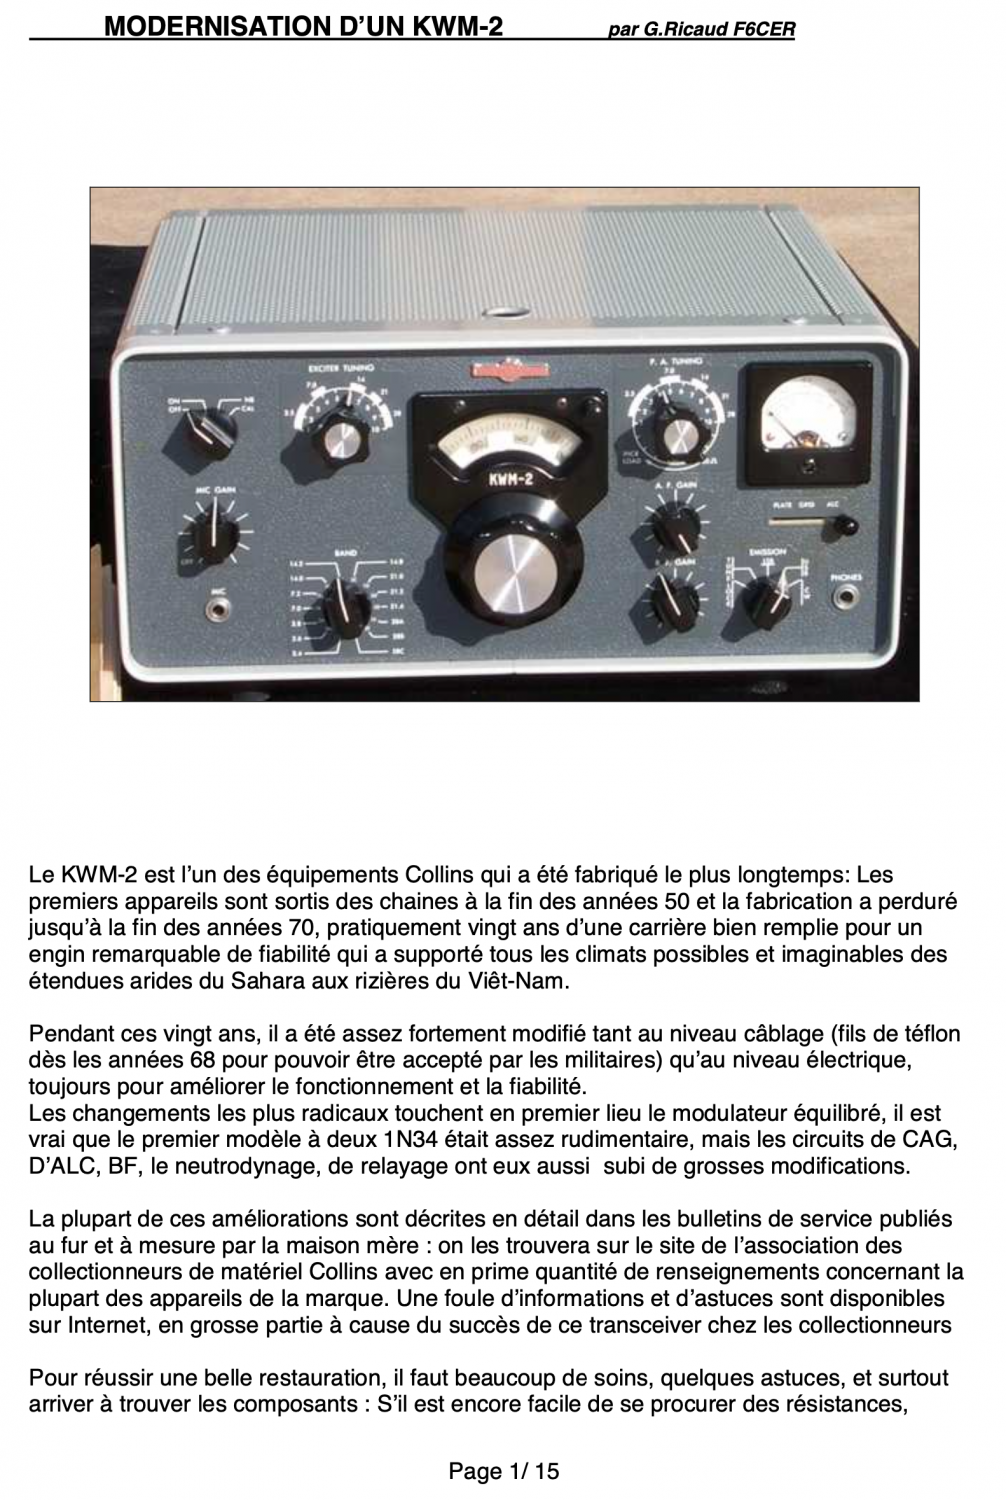 Collins KWM-2 Transceiver - Modernation of a KWM-2 - G. Ricaud F6CER (French)